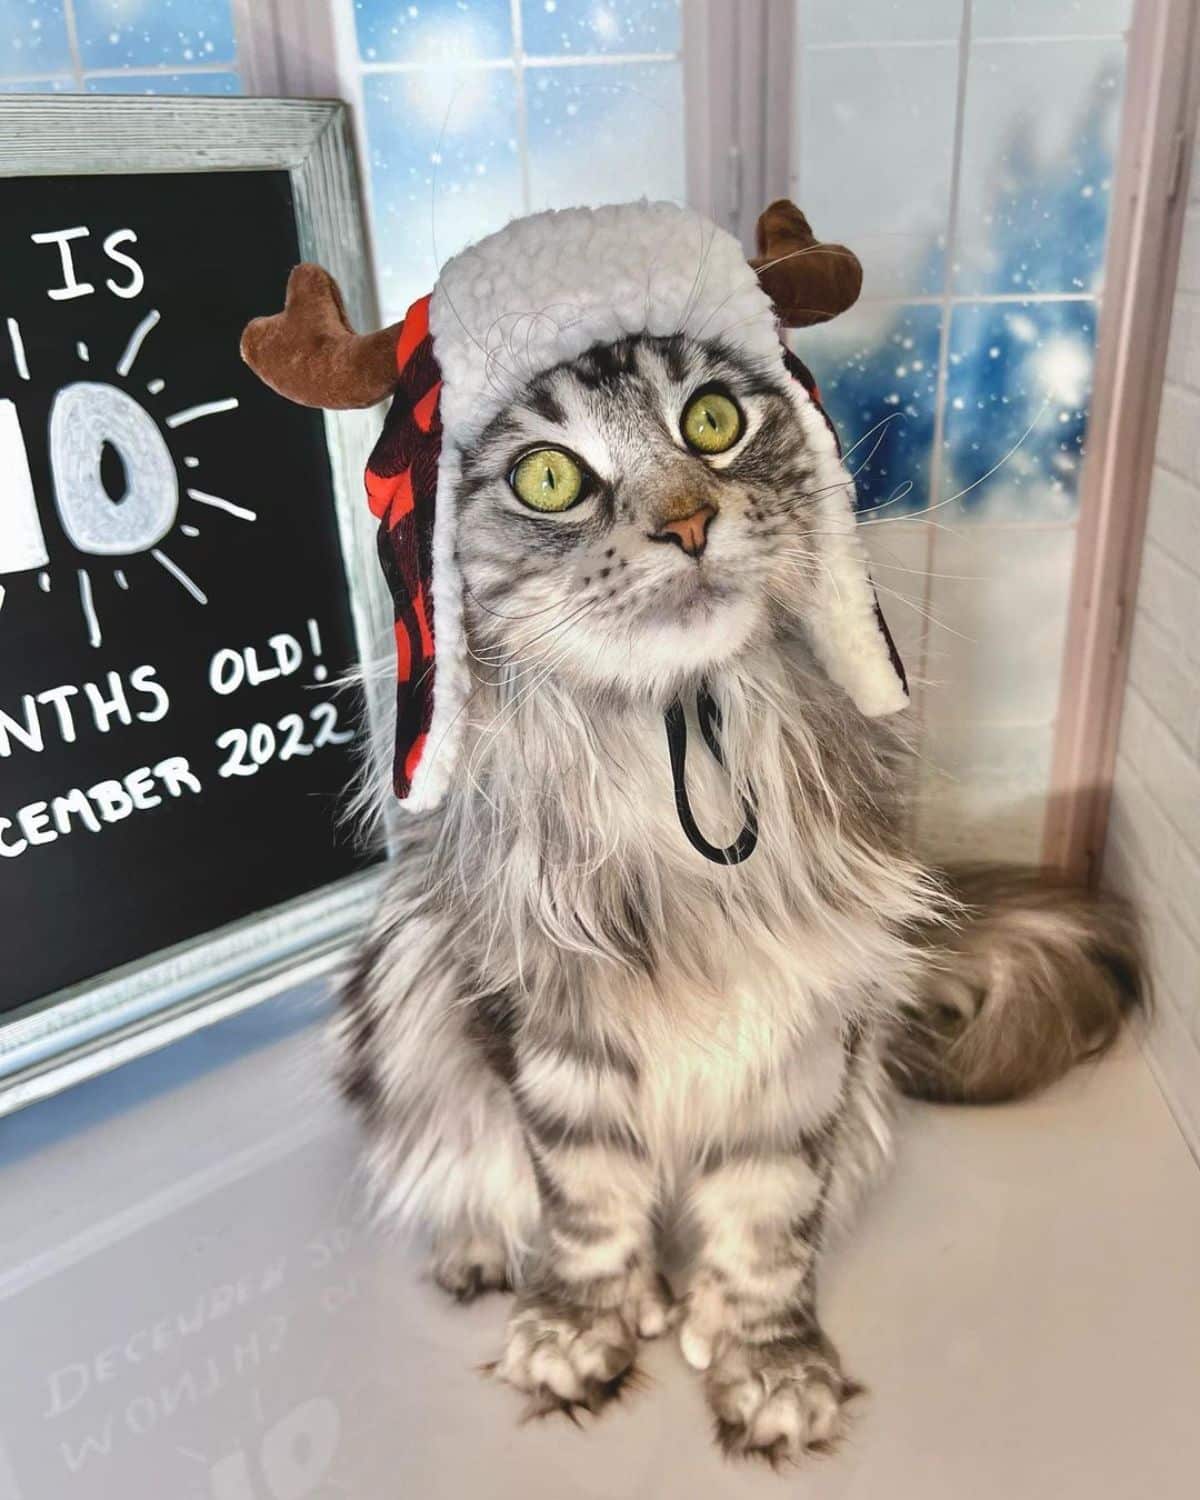 An adorable gray maine coon with extra toes wearing a reindeer hat sitting on a floor.